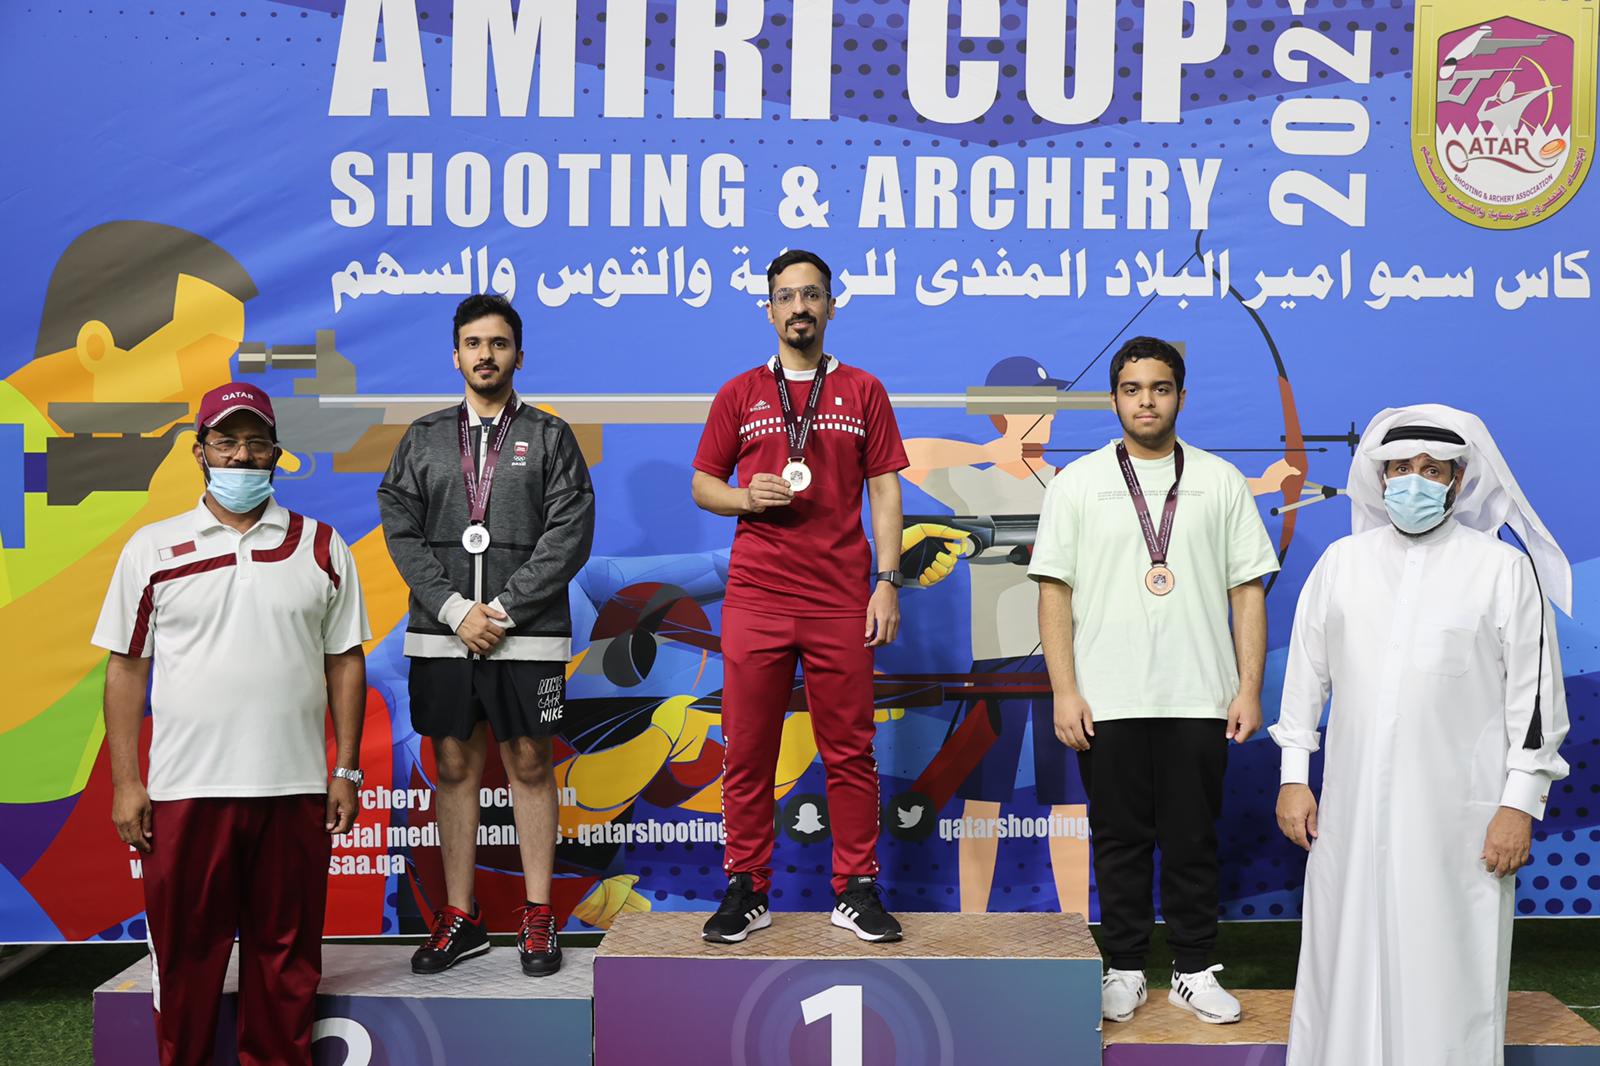 HH the Amir Shooting and Archery Cup: Ali Murshid Wins Air Pistol Gold Medal